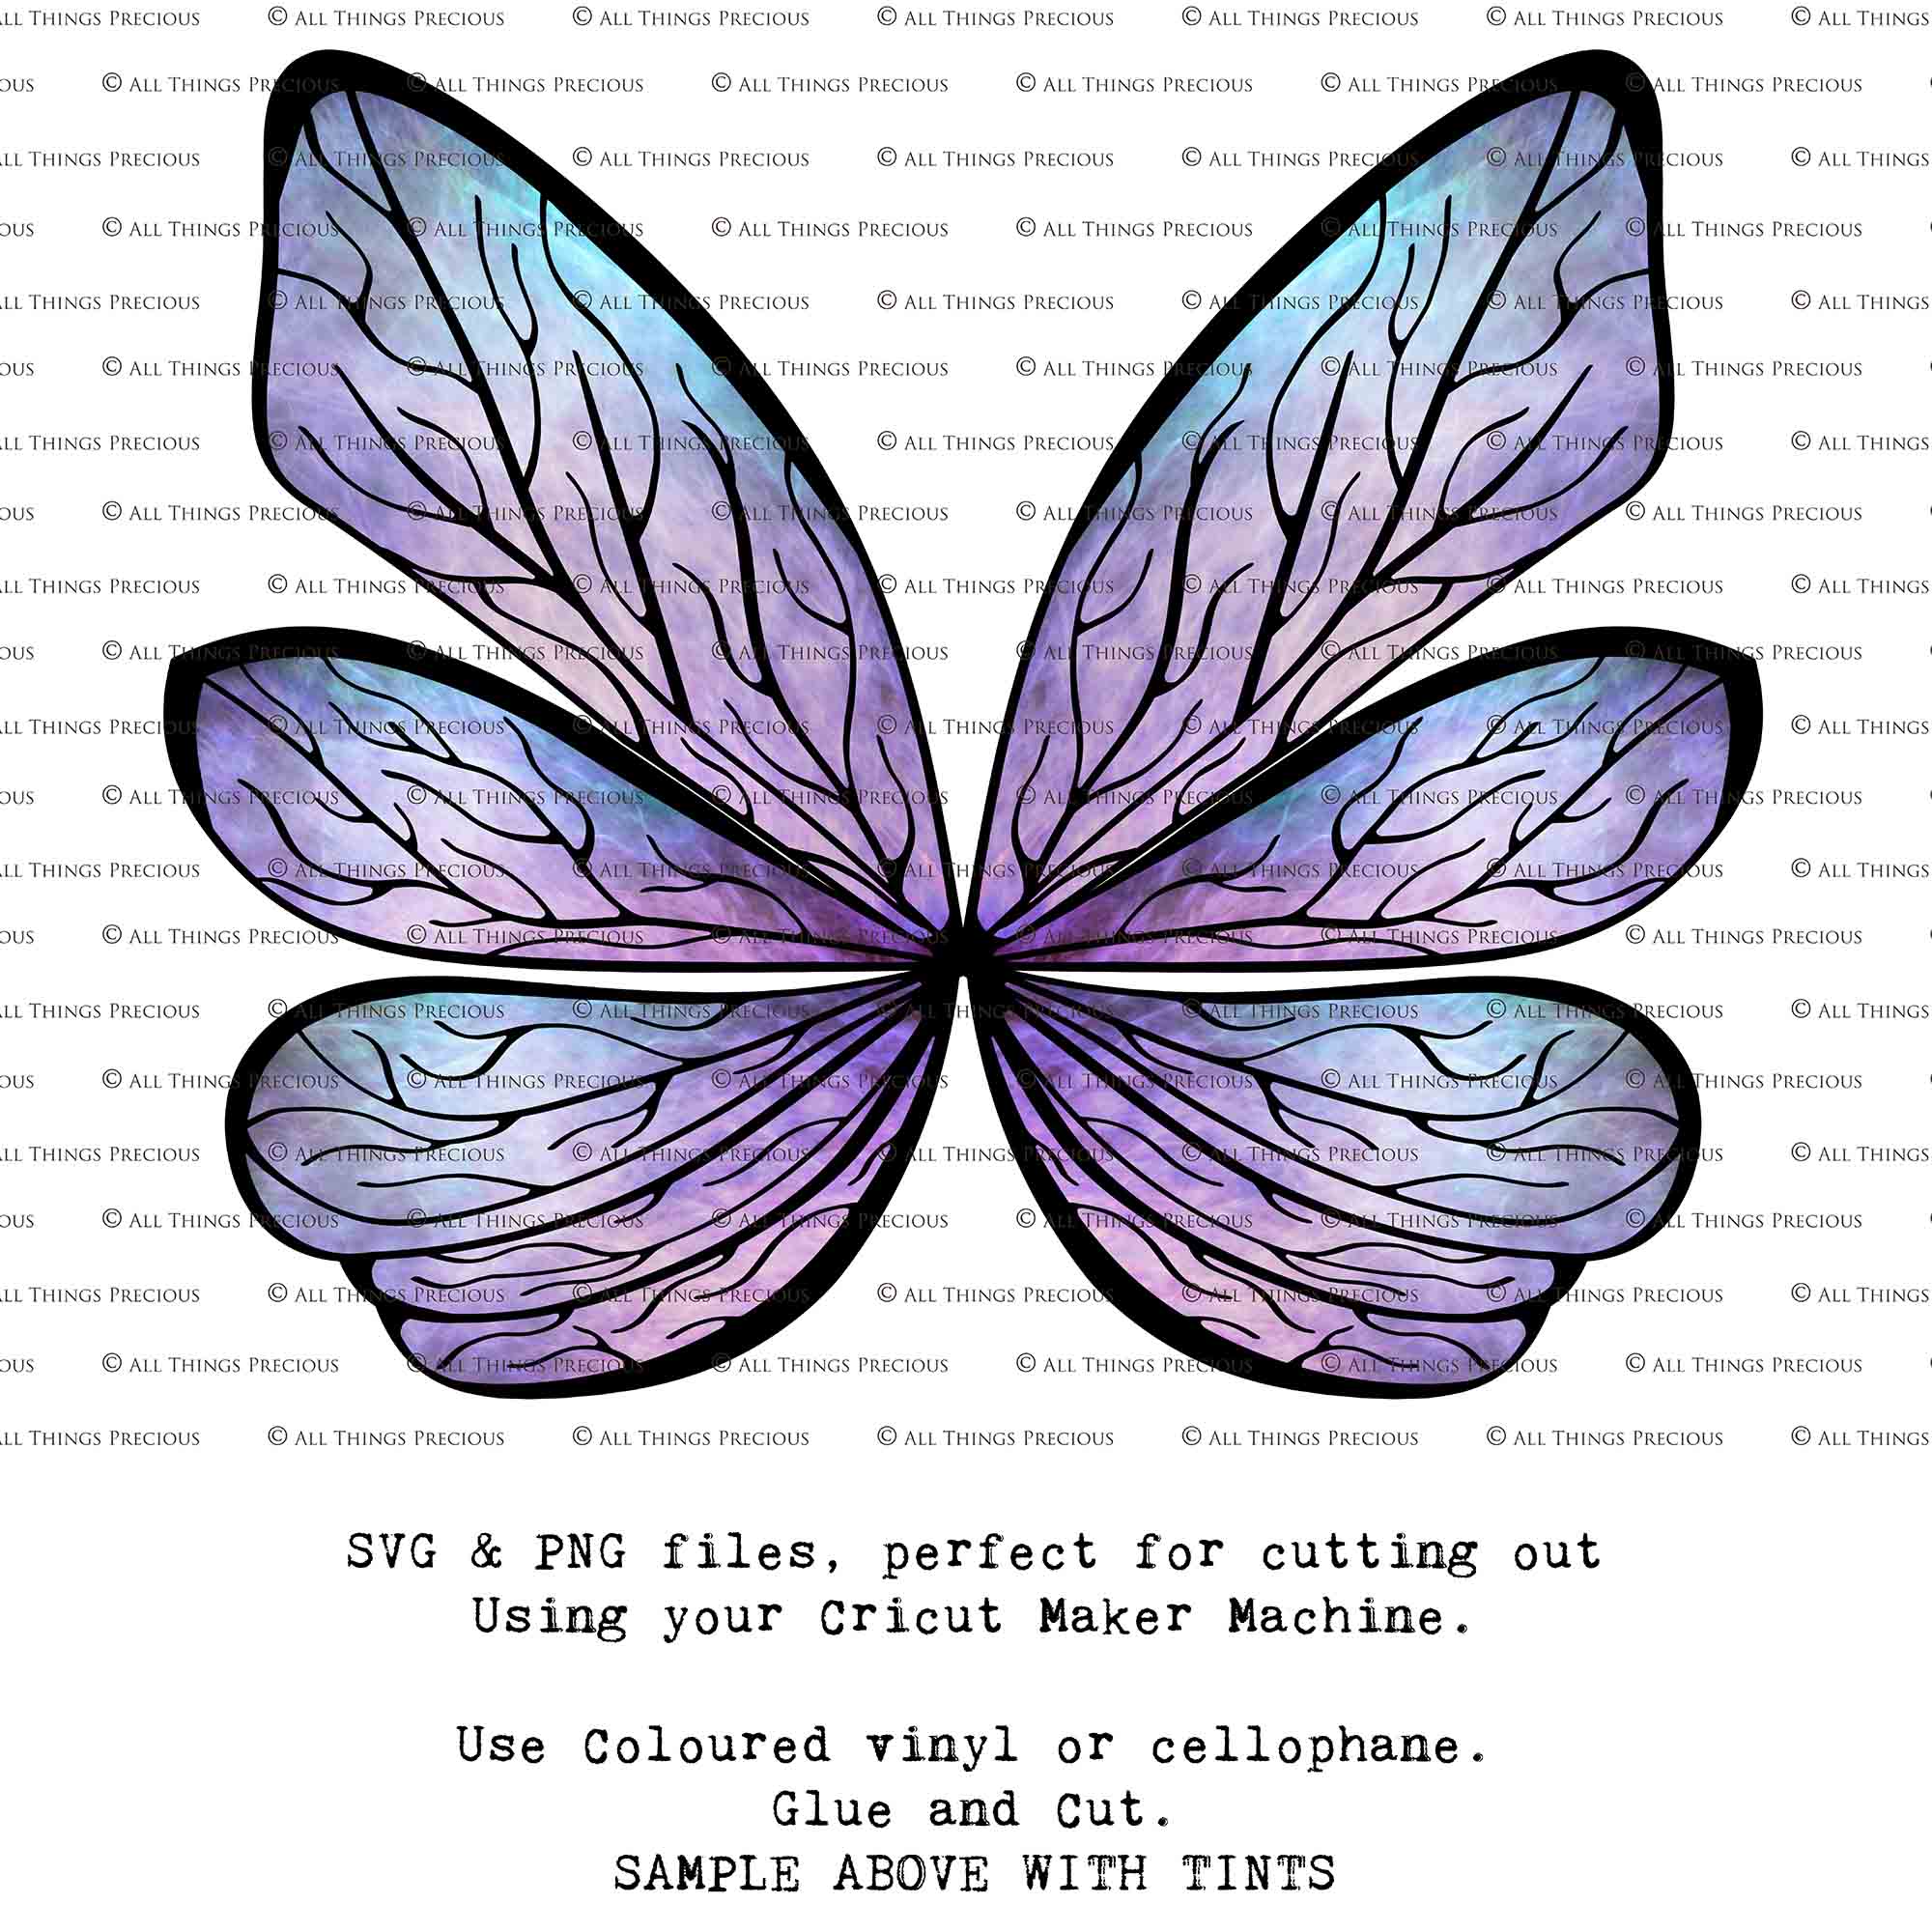 SVG & PNG Fairy Wing files for Cricut or Silhouette Cameo Cutting Machine. Create wearable fairy wings, in adult or children sizes.  Clipart design for Halloween Costumes, Fantasy or Cosplay or photography. Printable for weddings, engagement, baby shower invitations. Individual wing parts. Cut and assemble. Fairycore.